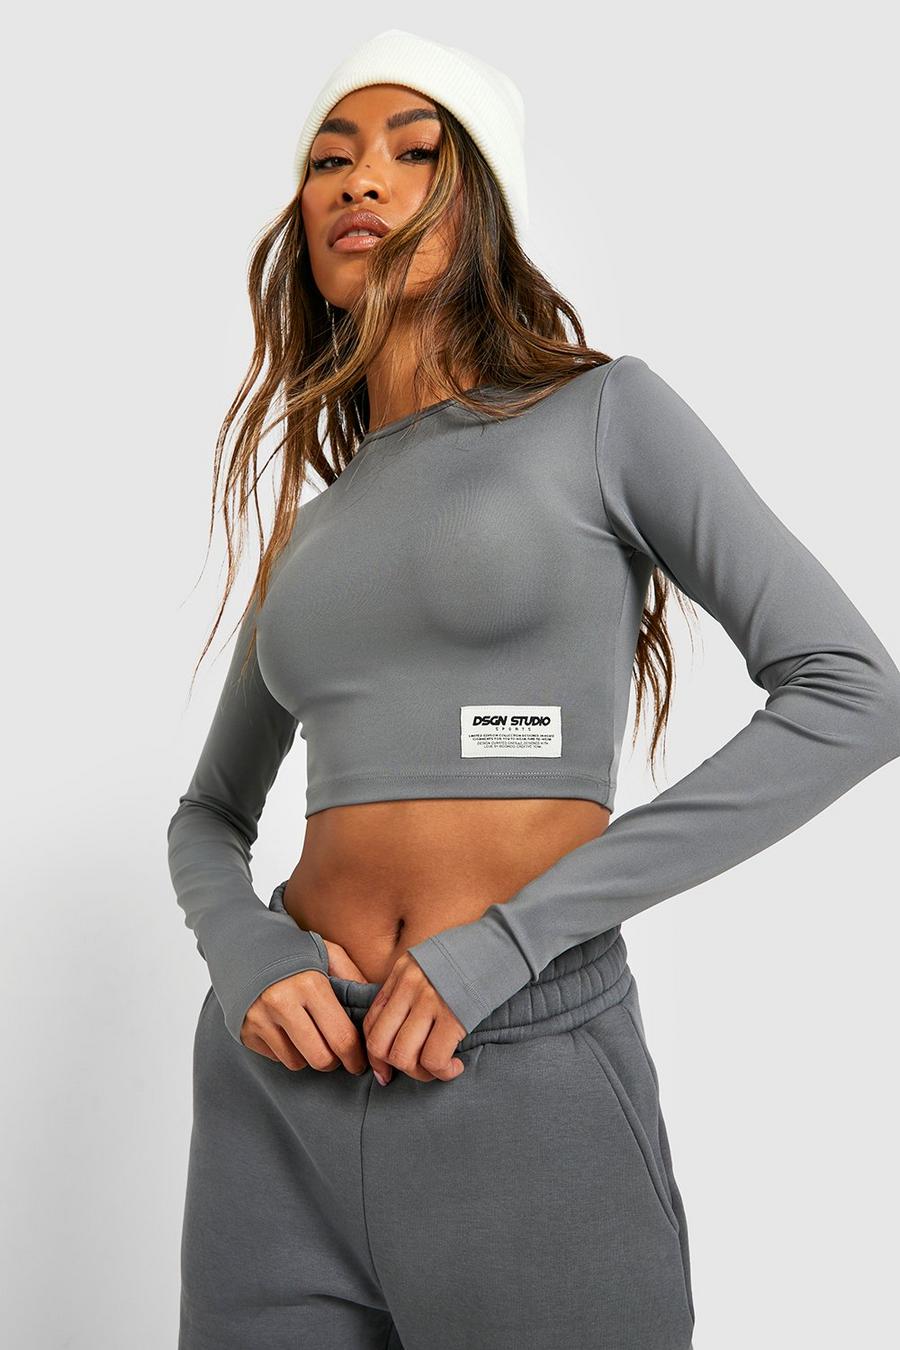 Black Friday Workout Clothes 2023, Black Friday Activewear Deals